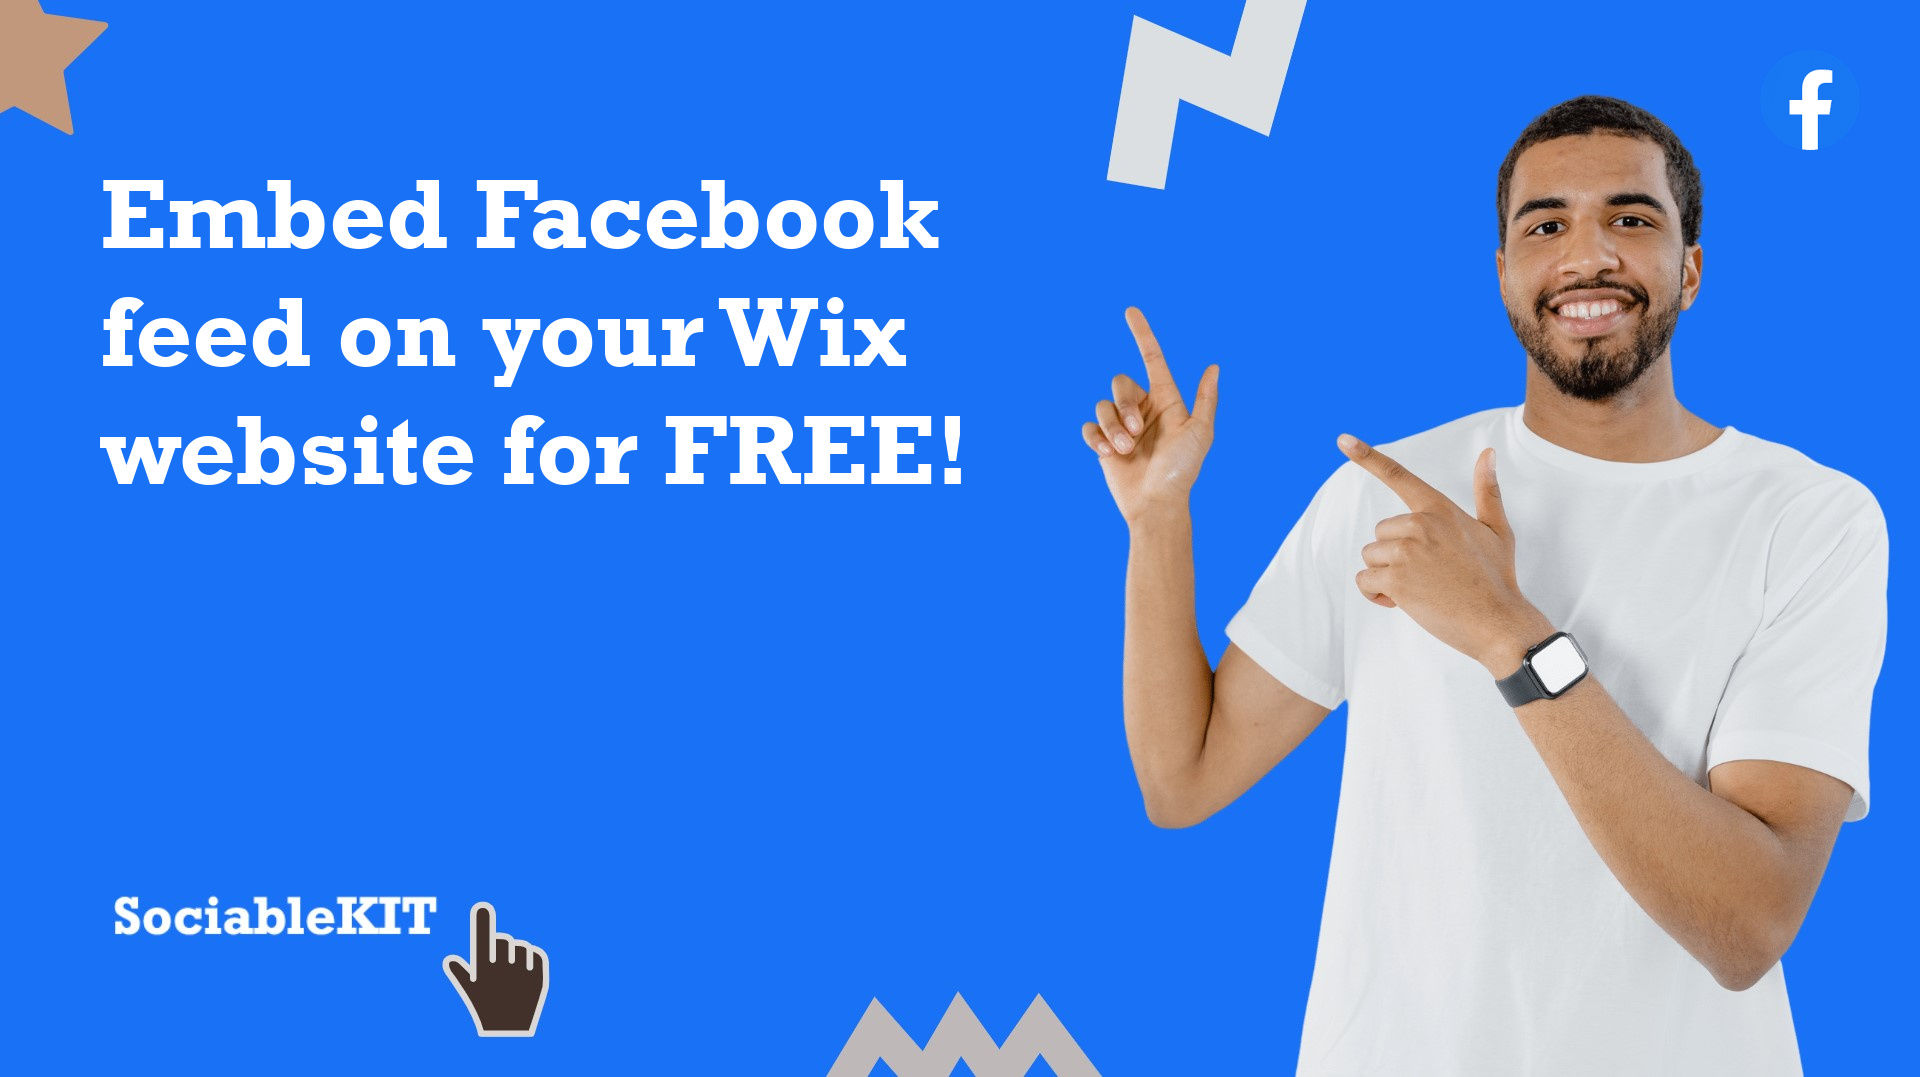 How to embed Facebook feed on your Wix website for FREE?